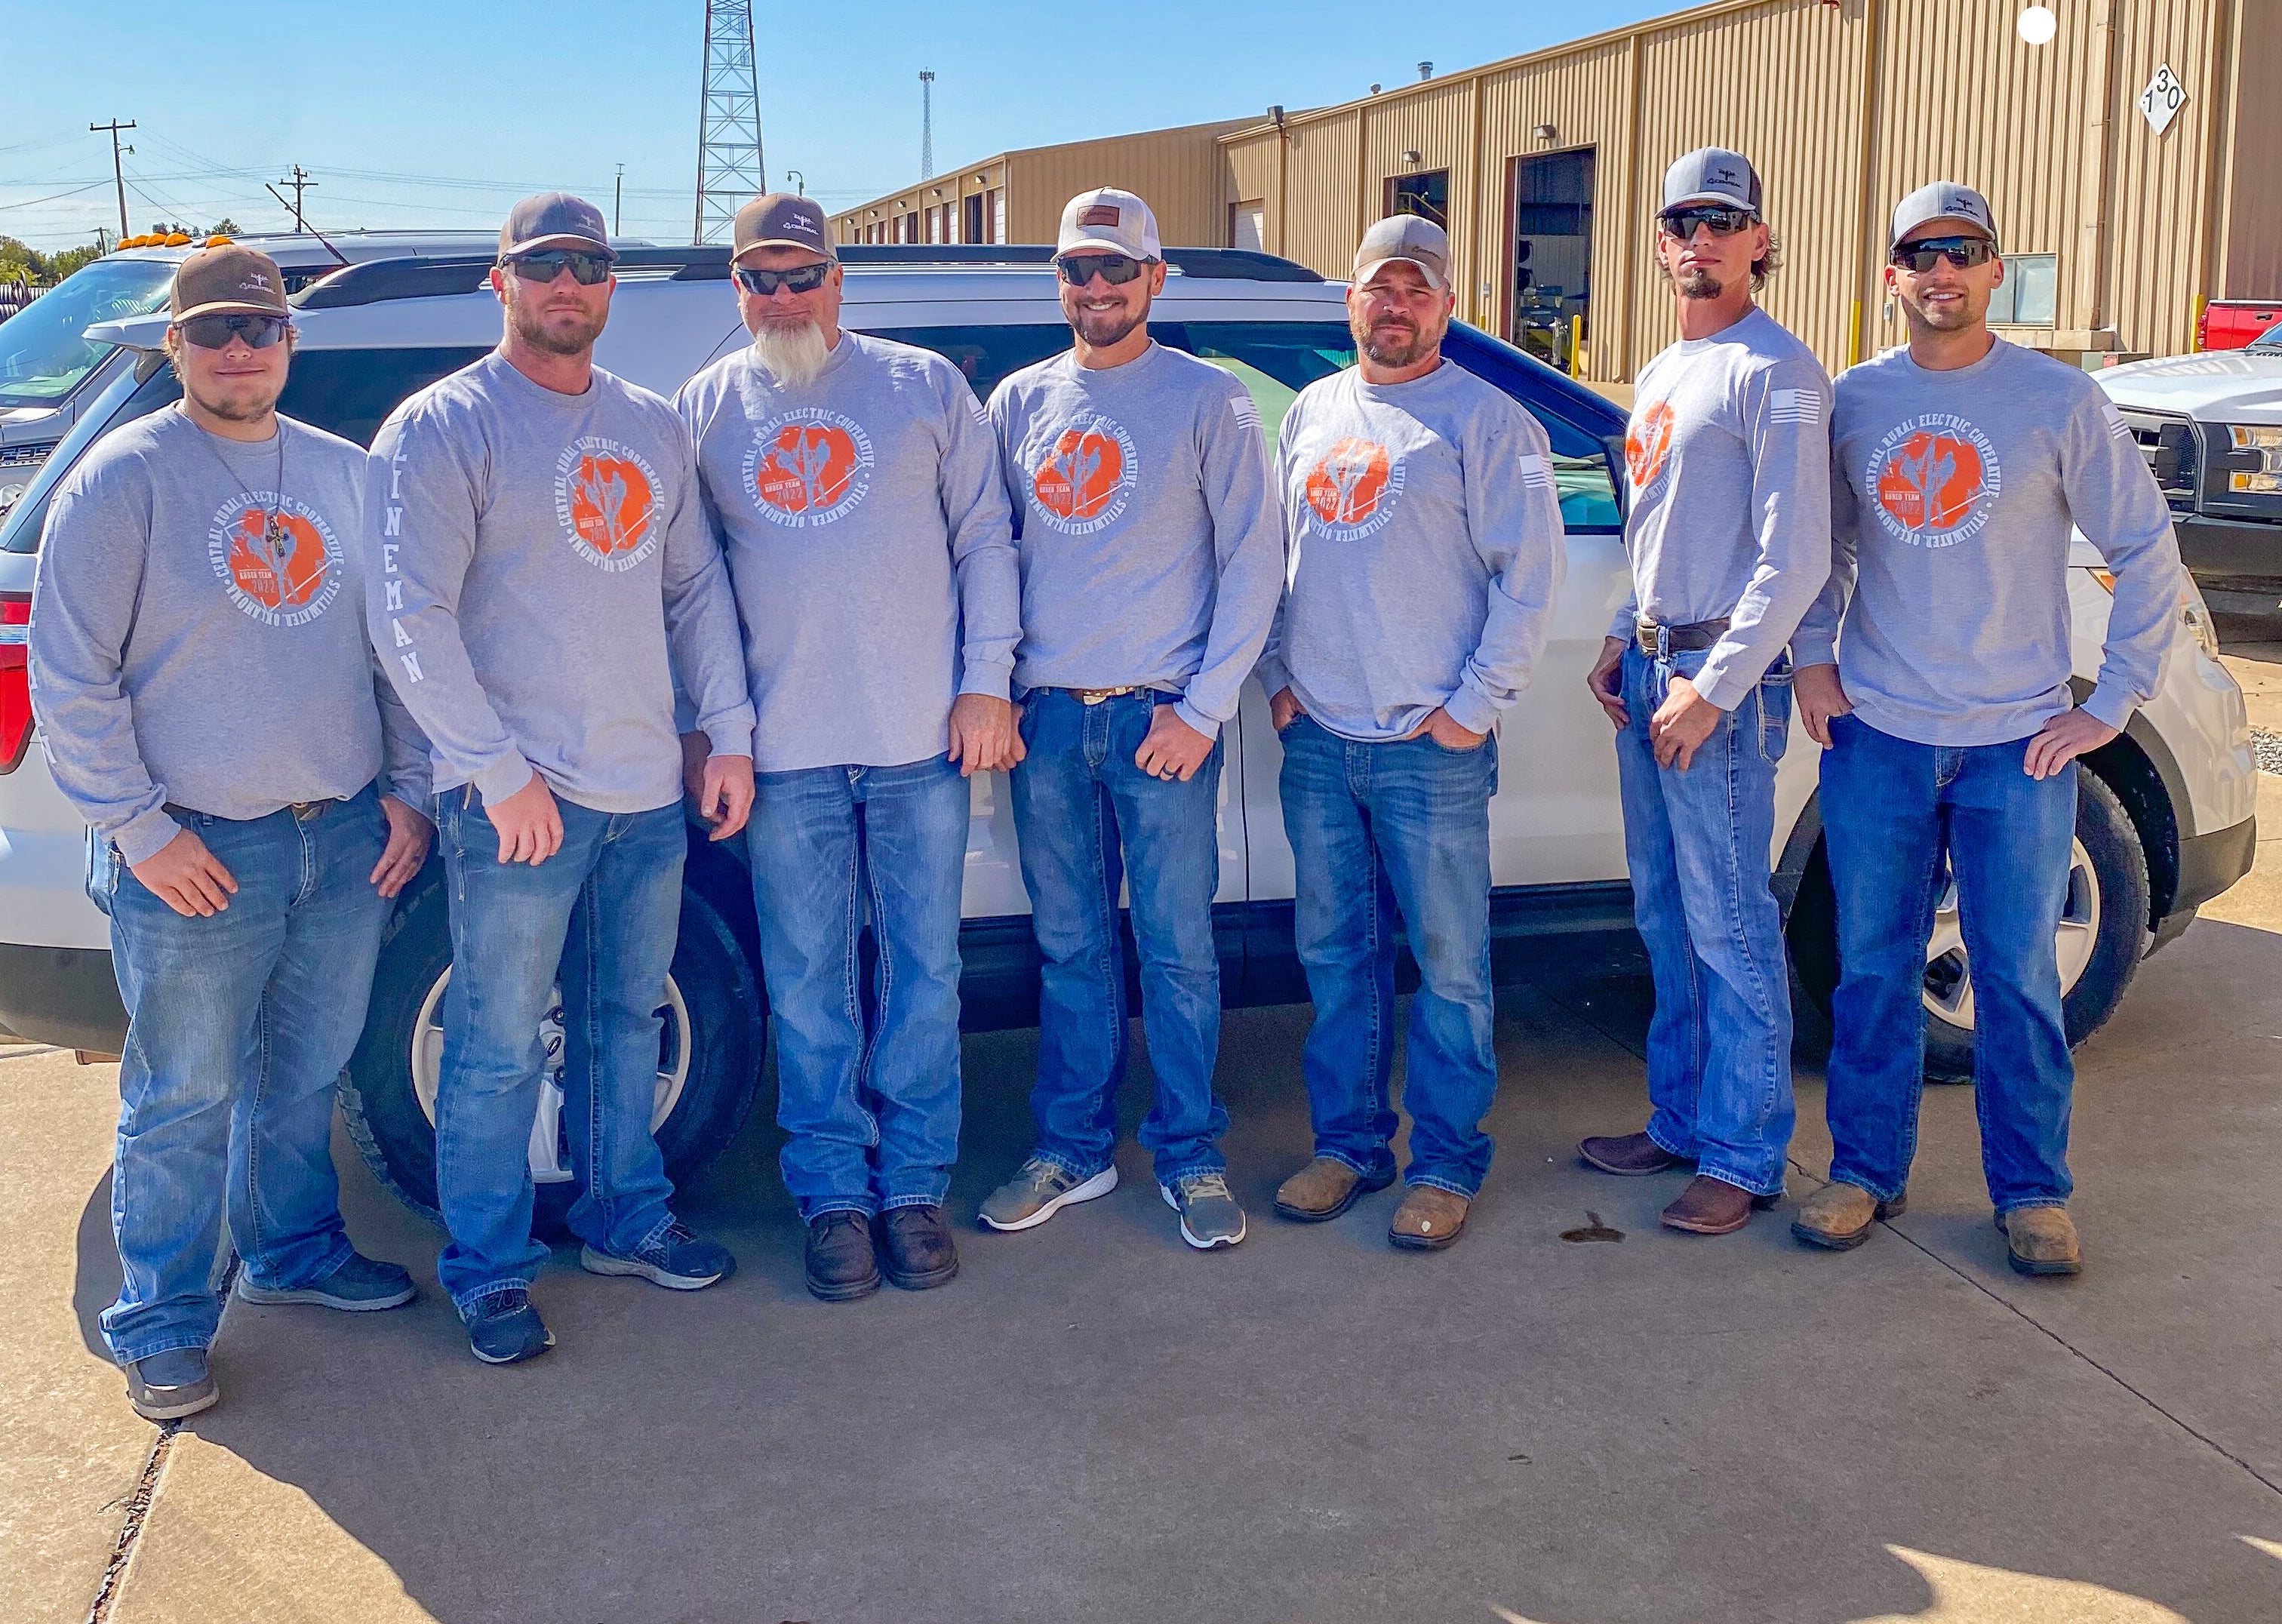 Central linemen participated in the International Lineman’s Rodeo in October. From left to right: Dylon Smith, Bryce Mason, Jerry Cundiff, Kyle Williams, Clint Robinson, Wyatt Fuller and Eliot Tremblay.